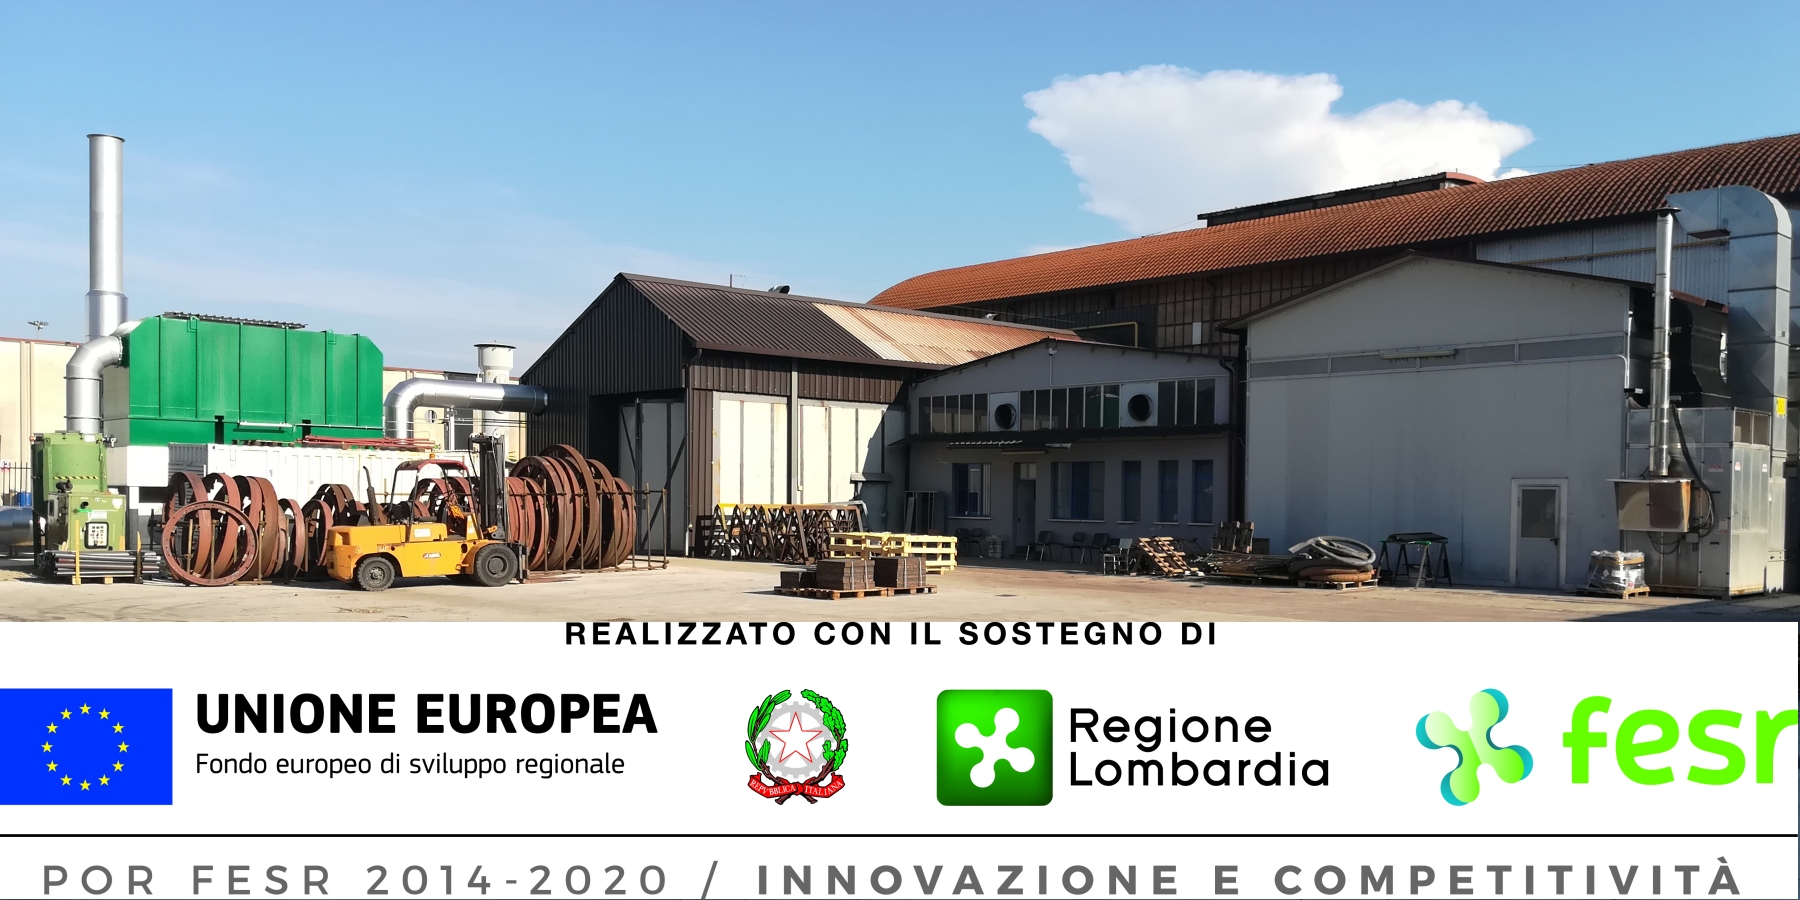 Enlarged Voghera plant now operational!